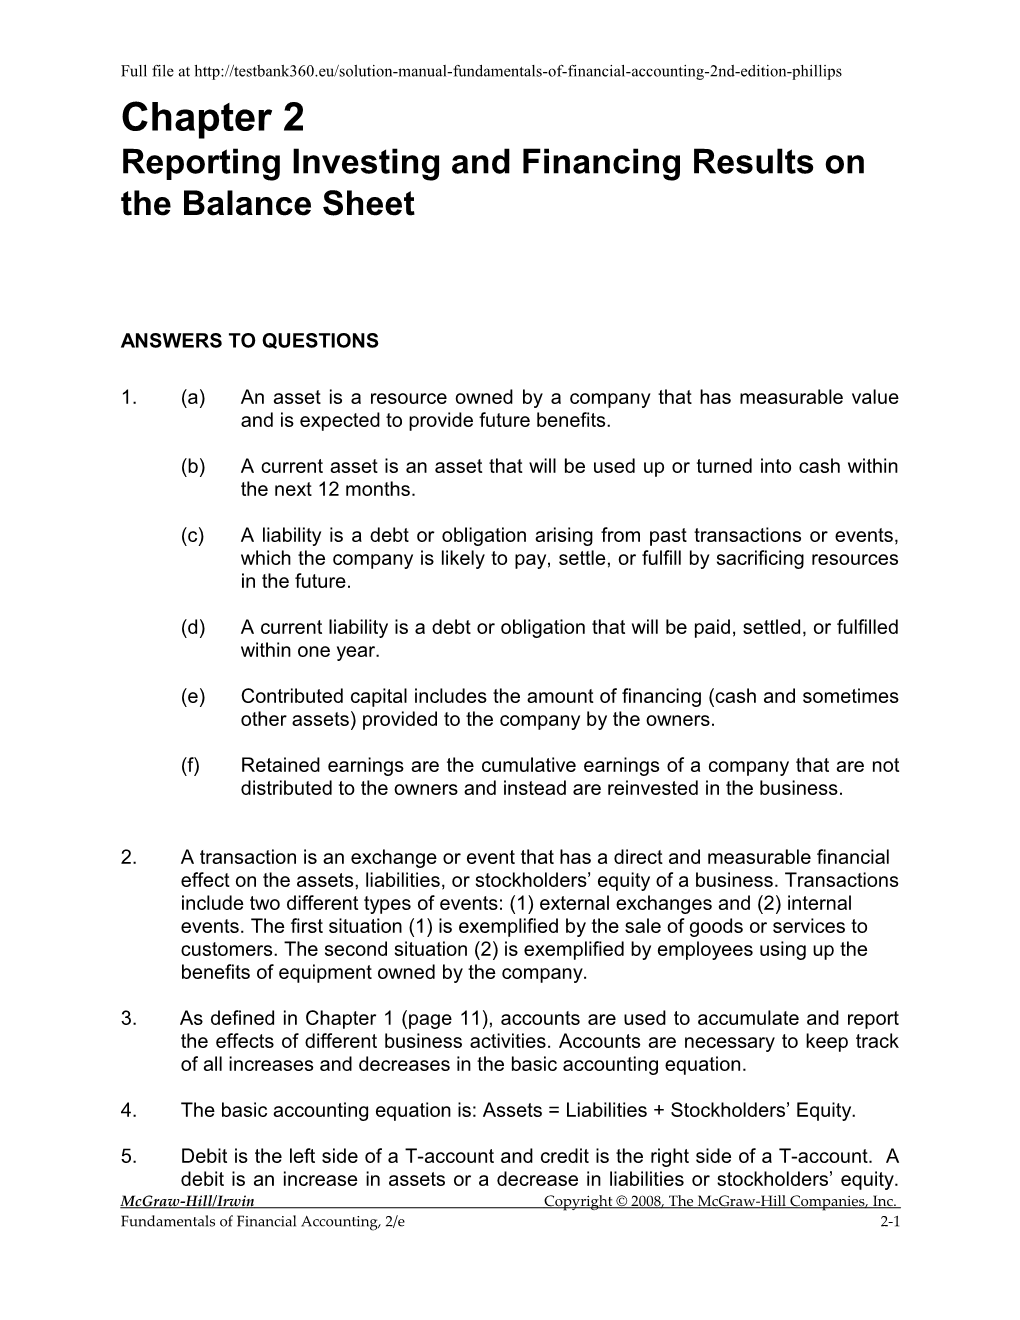 Reporting Investing and Financing Results on the Balance Sheet